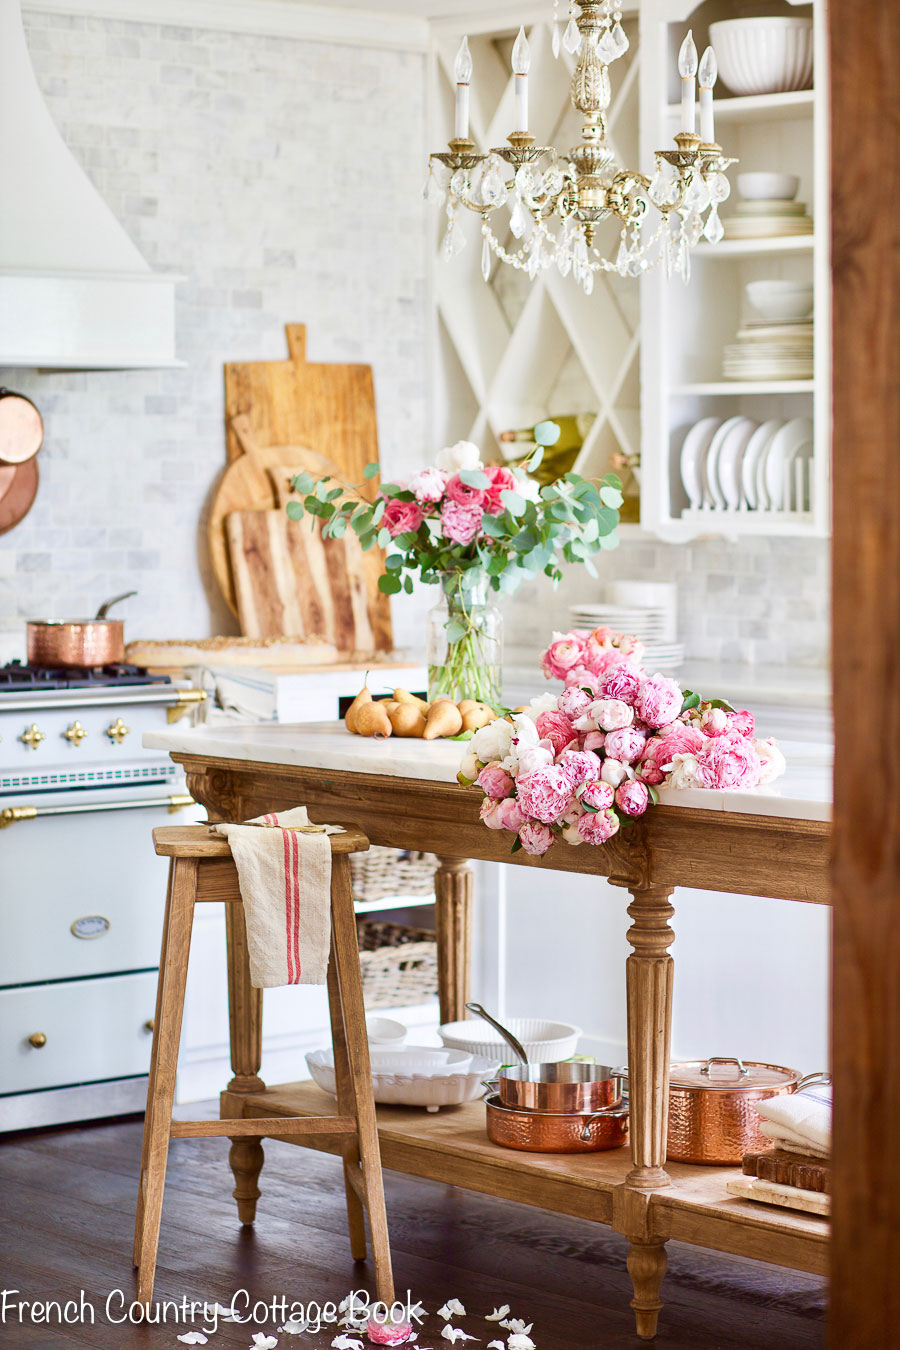 French Country Kitchen | French Country Cottage